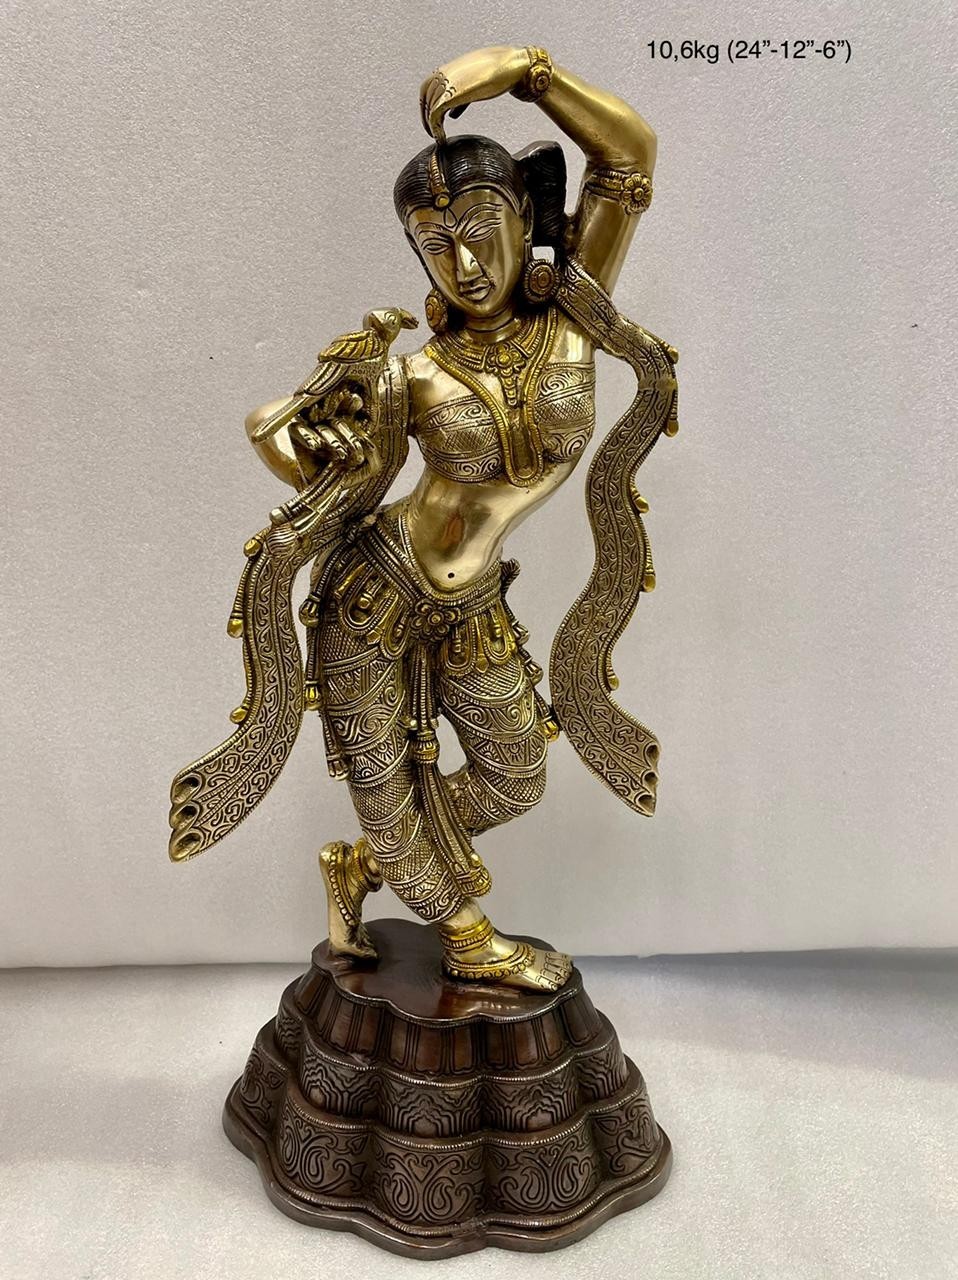 Antique brass sculpture of an Indian lady holding a parrot on her left hand  - Assamika: Arts, crafts, antiques, collectibles, home decor and more